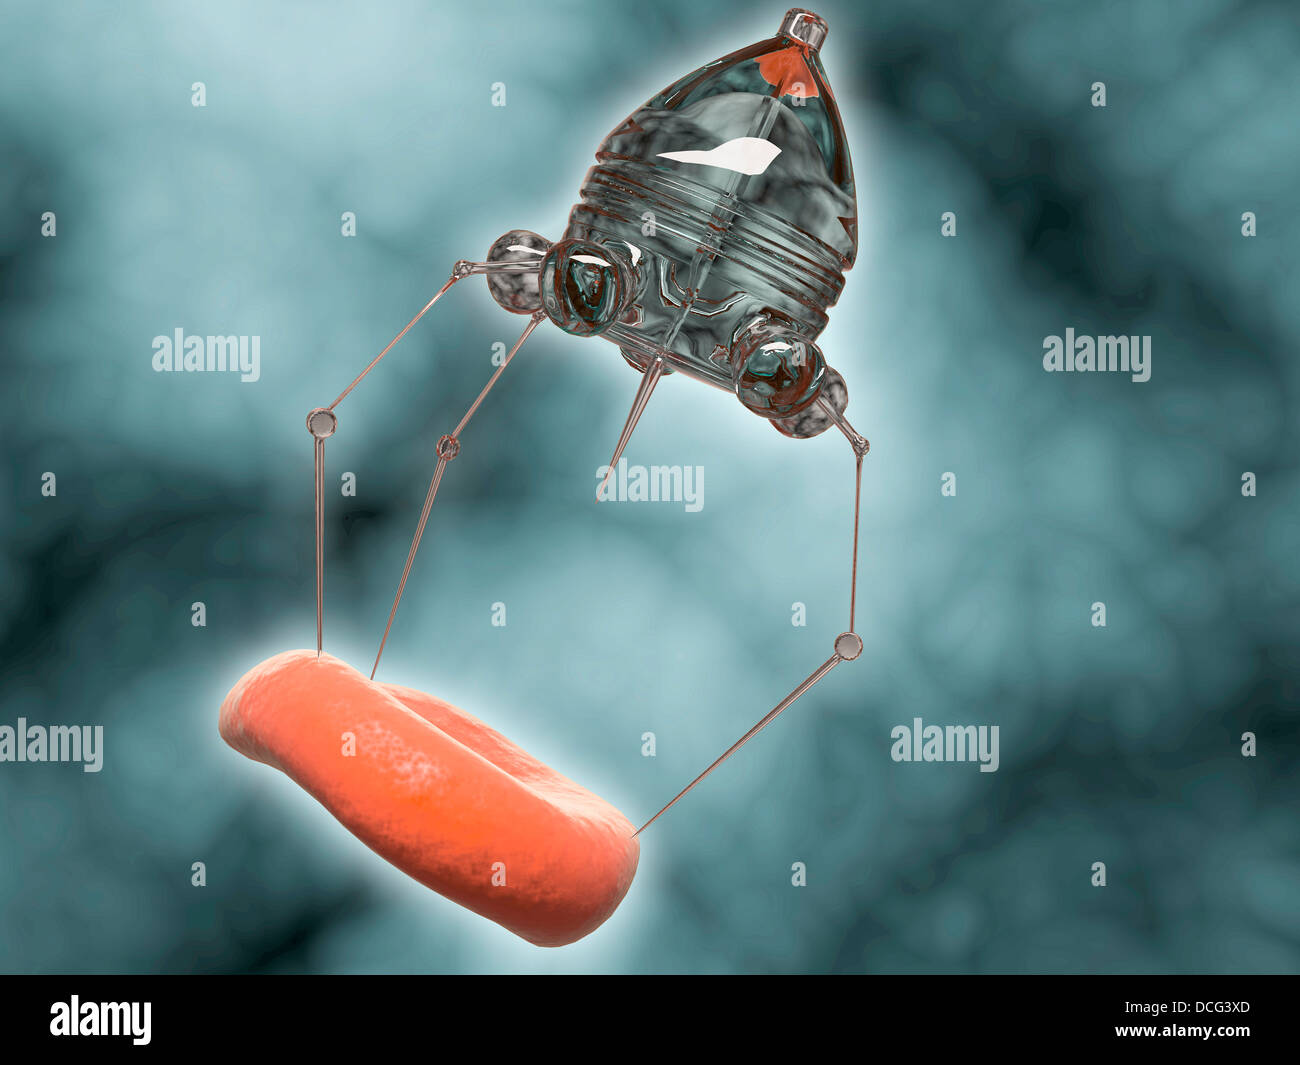 Conceptual image of a nanobot injecting a red blood cell. Stock Photo